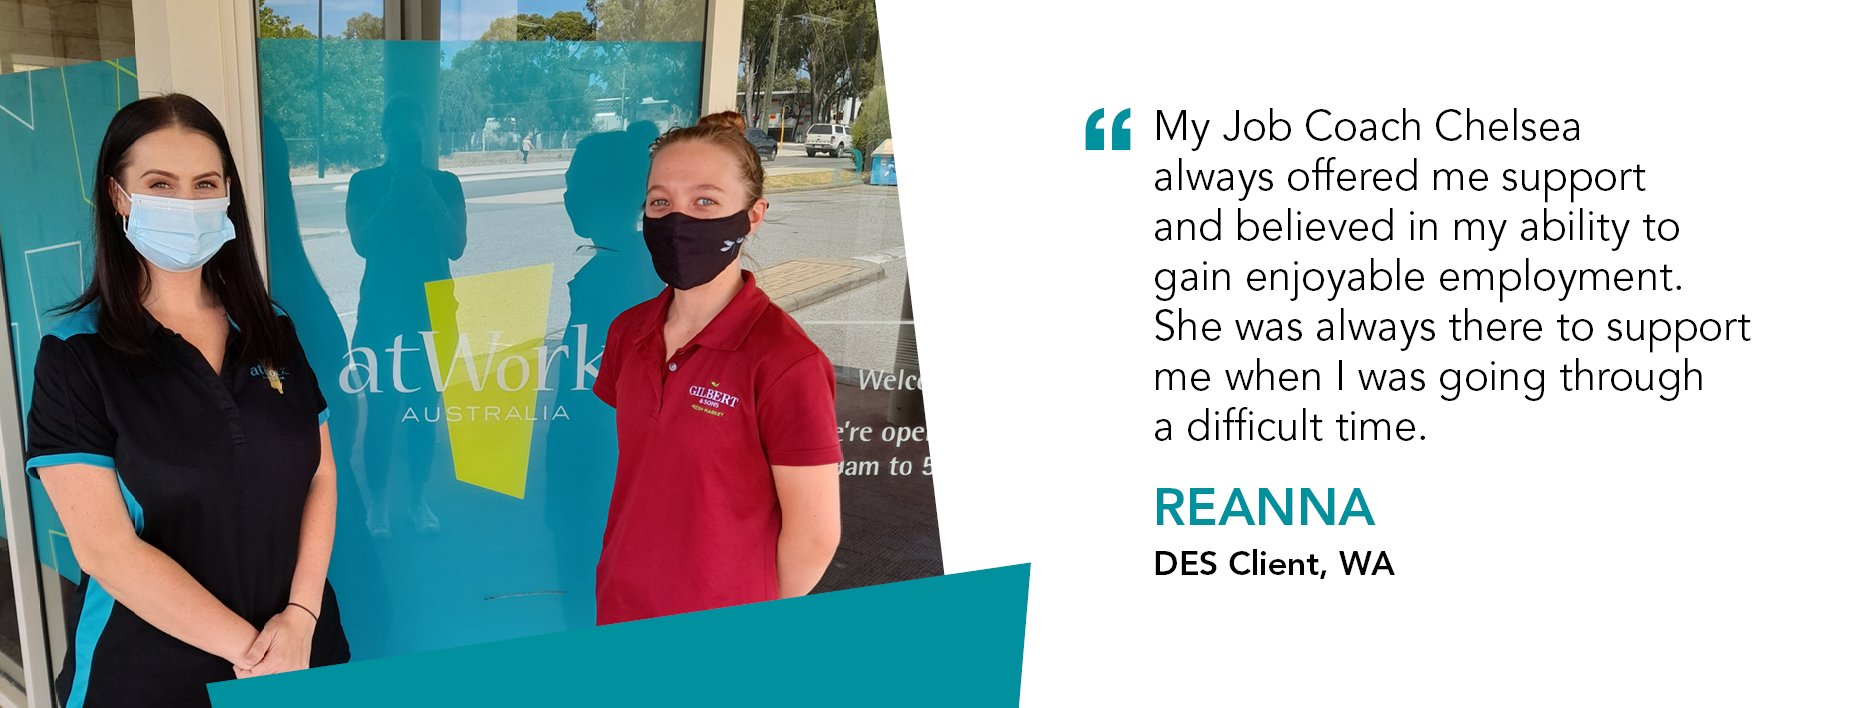 “My Job Coach Chelsea always offered me support and believed in my ability to gain enjoyable employment. She was always there to support me when I was going through a difficult time.” Reanna, DES Client, WA